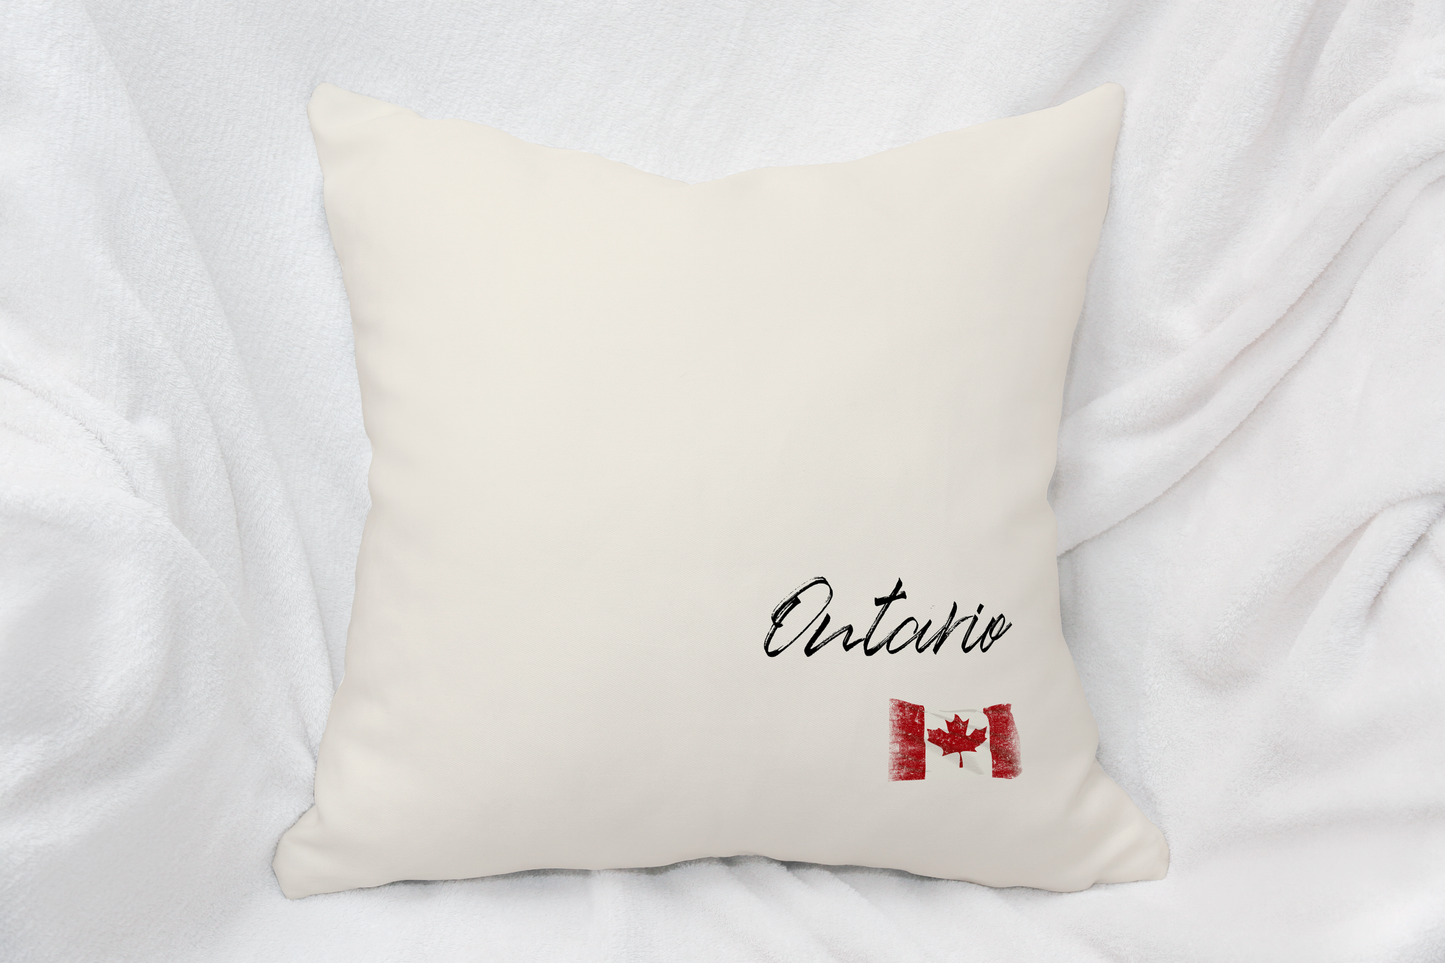 Shadowshore Designs Canadian Province or Territory Throw Pillow